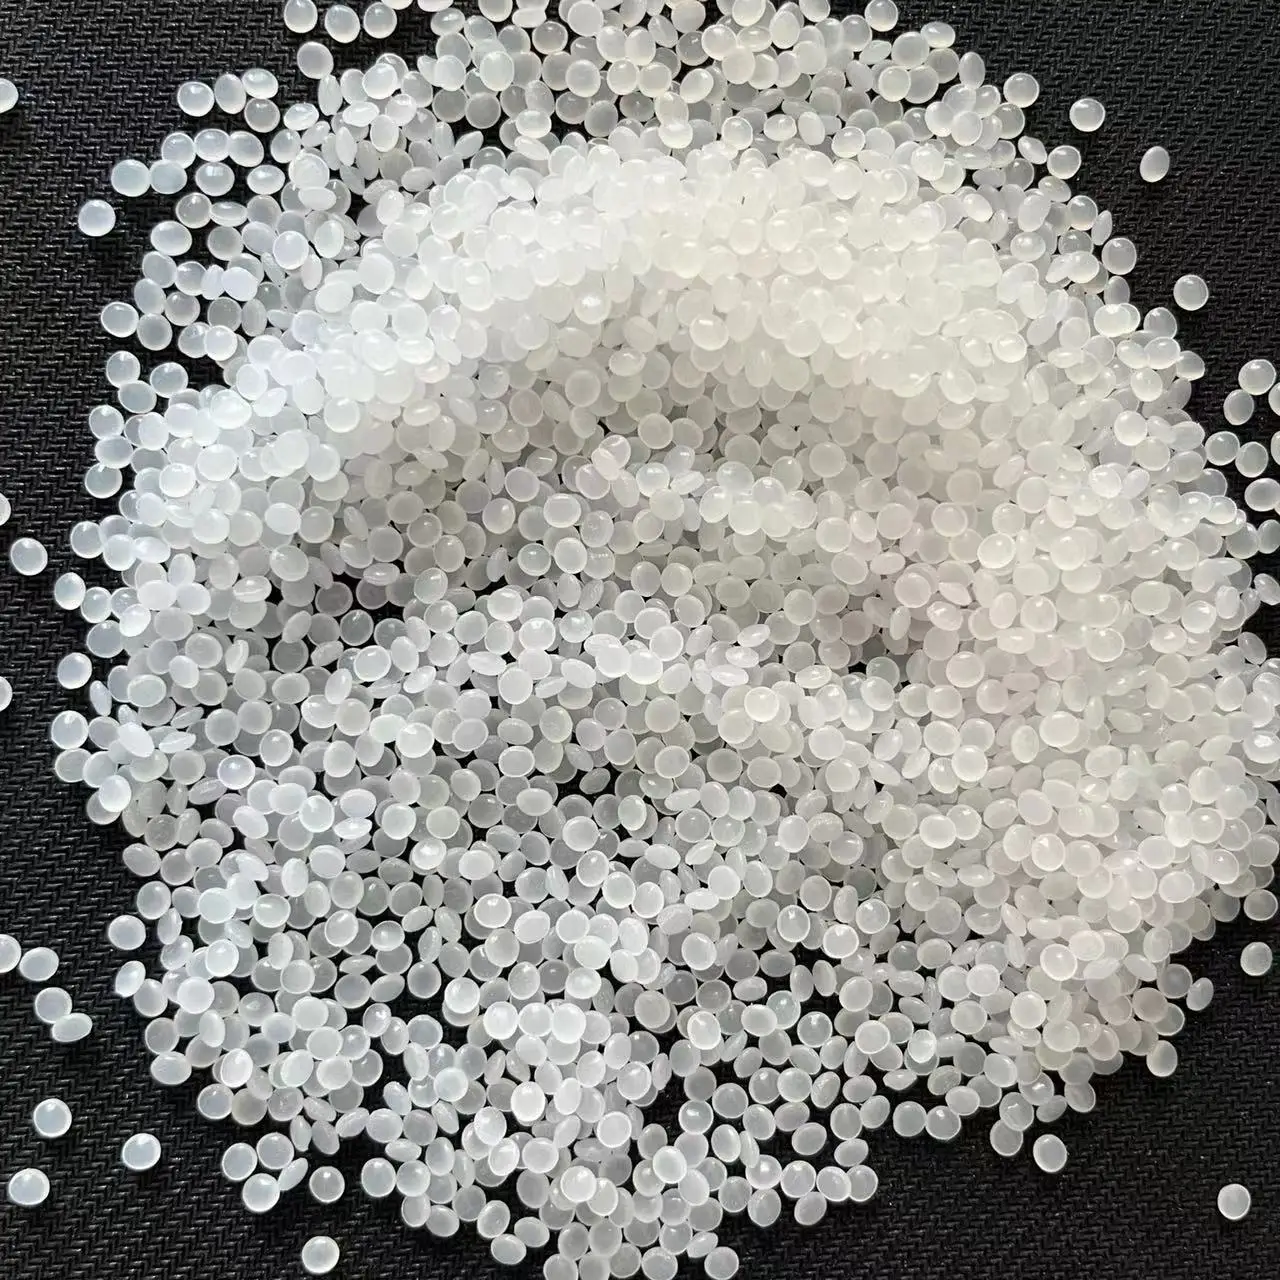 Wholesale polyethylene virgin/recycle lldpe/ldpe/hdpe film granules with lowest price